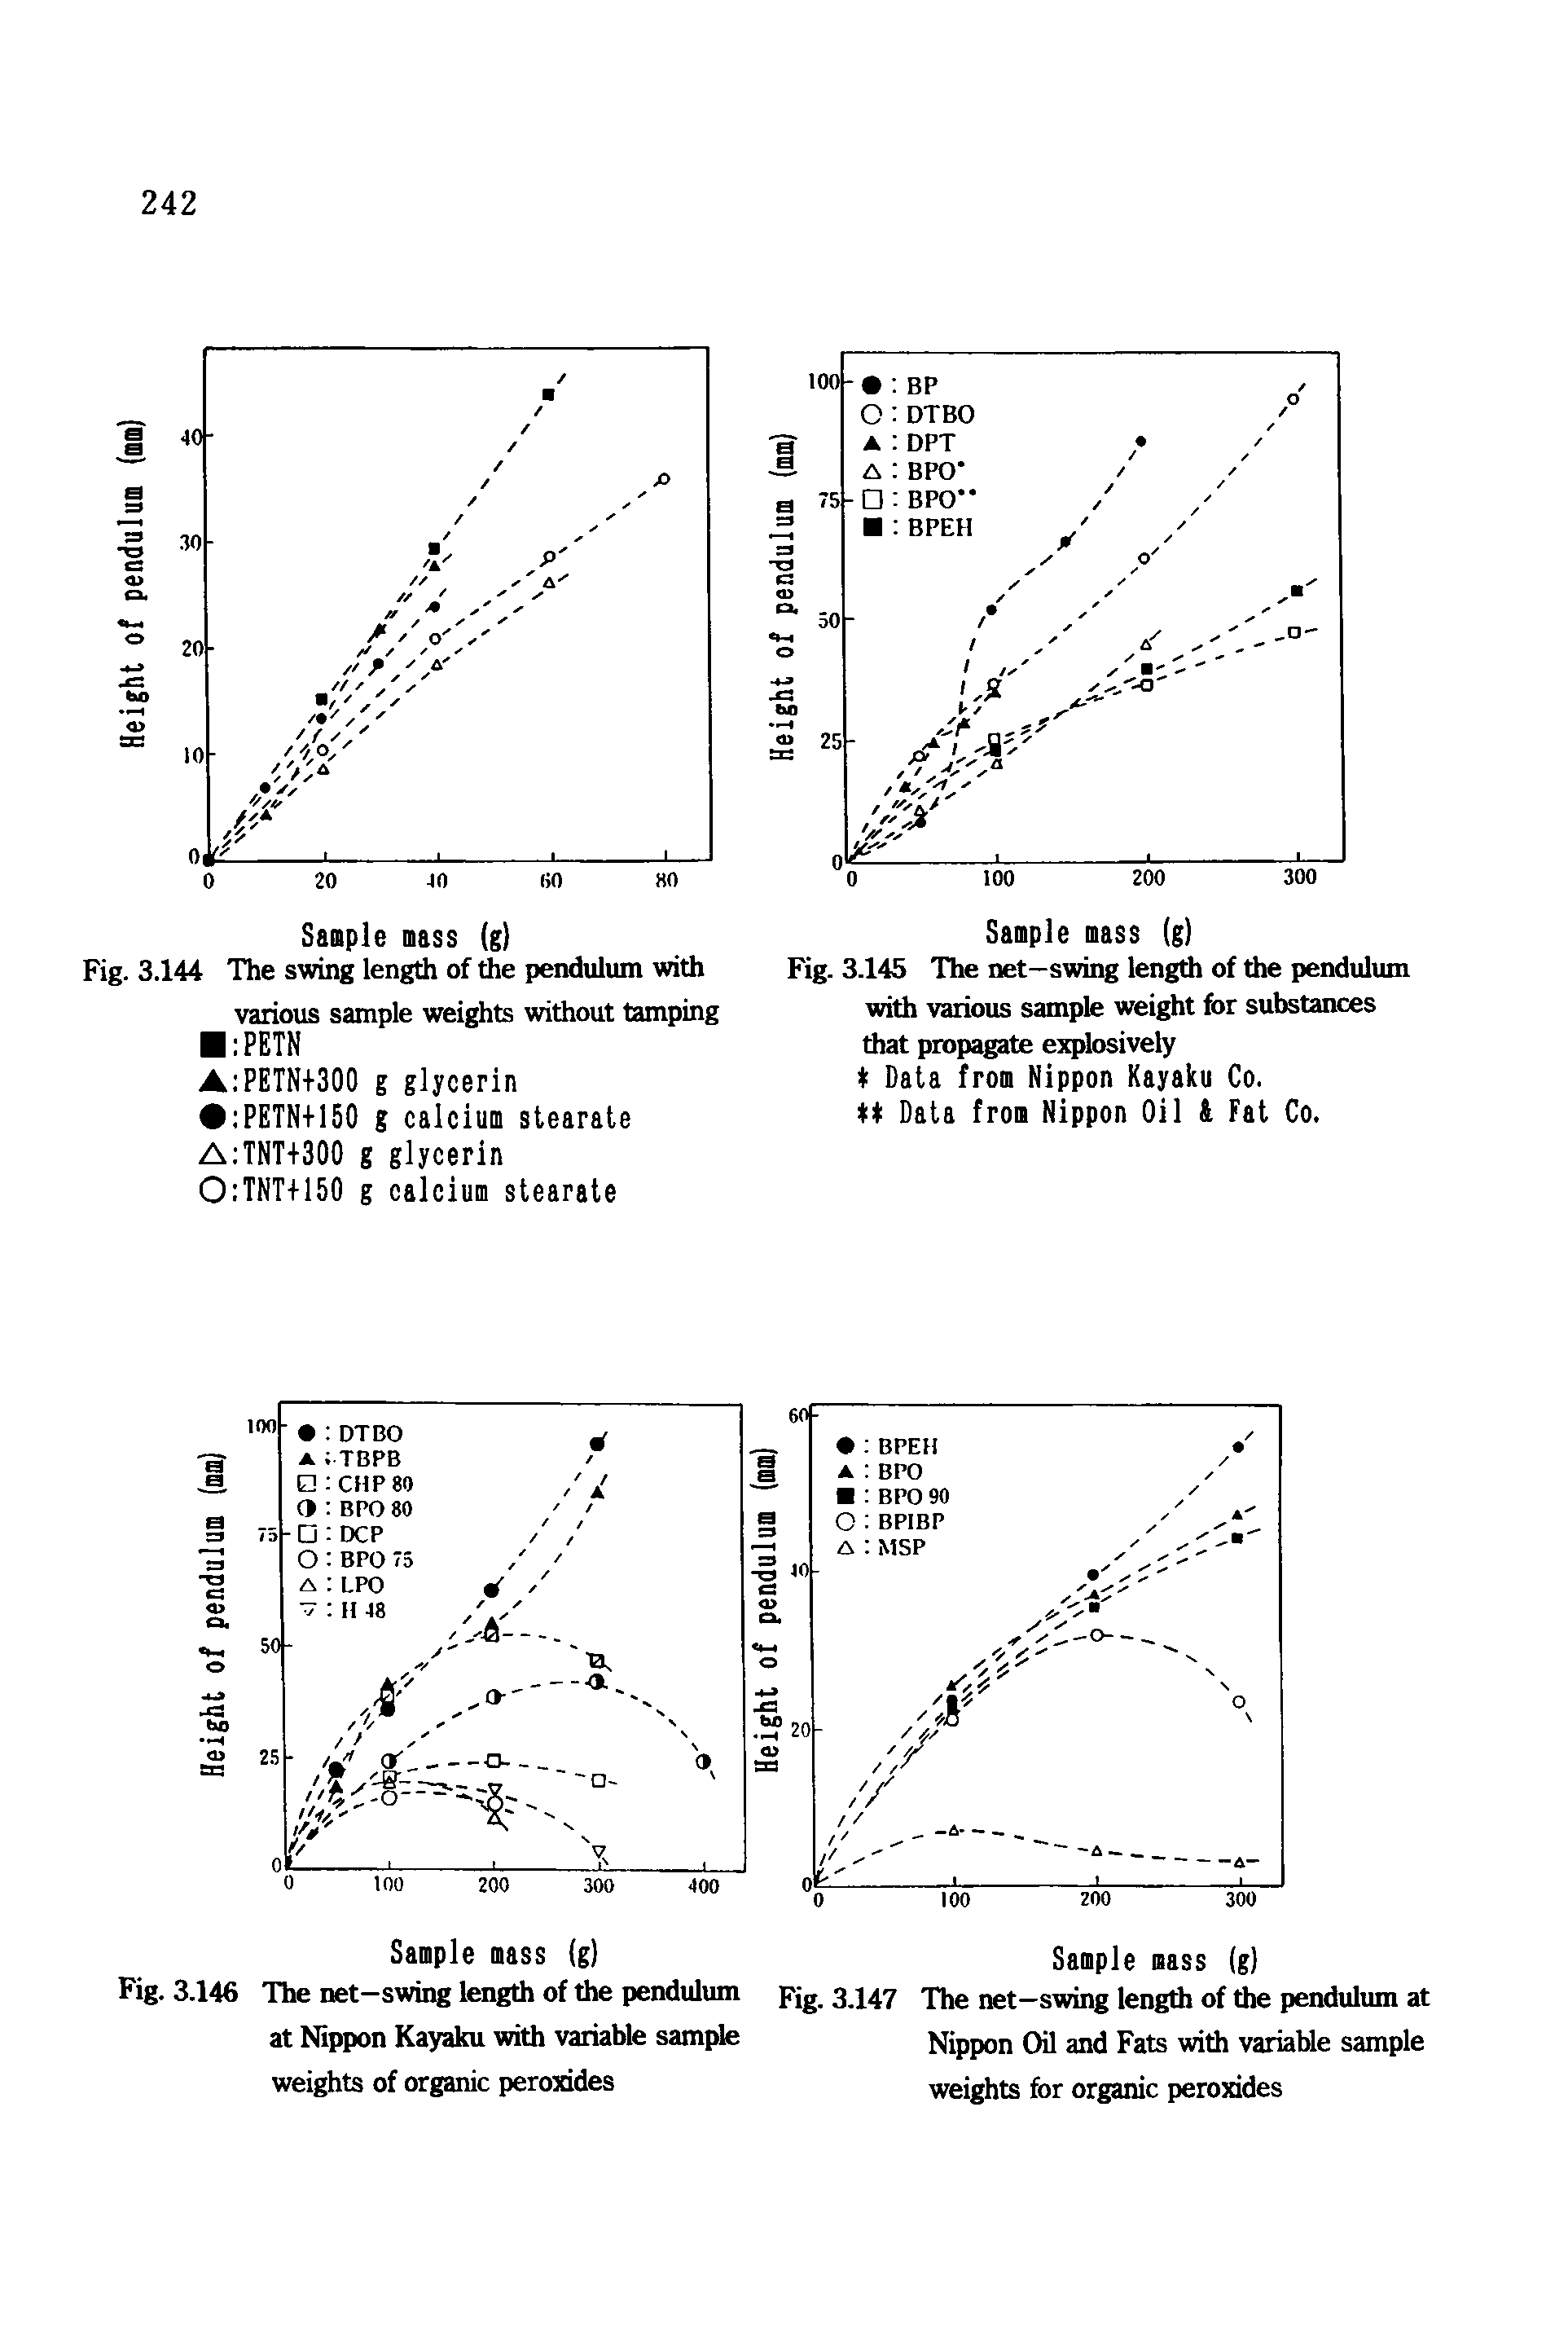 Fig. 3.145 The net—swing length of the pendulum with various sample weight for substances that propagate explosively Data from Nippon Kayaku Co. tt Data from Nippon Oil ft Fat Co.